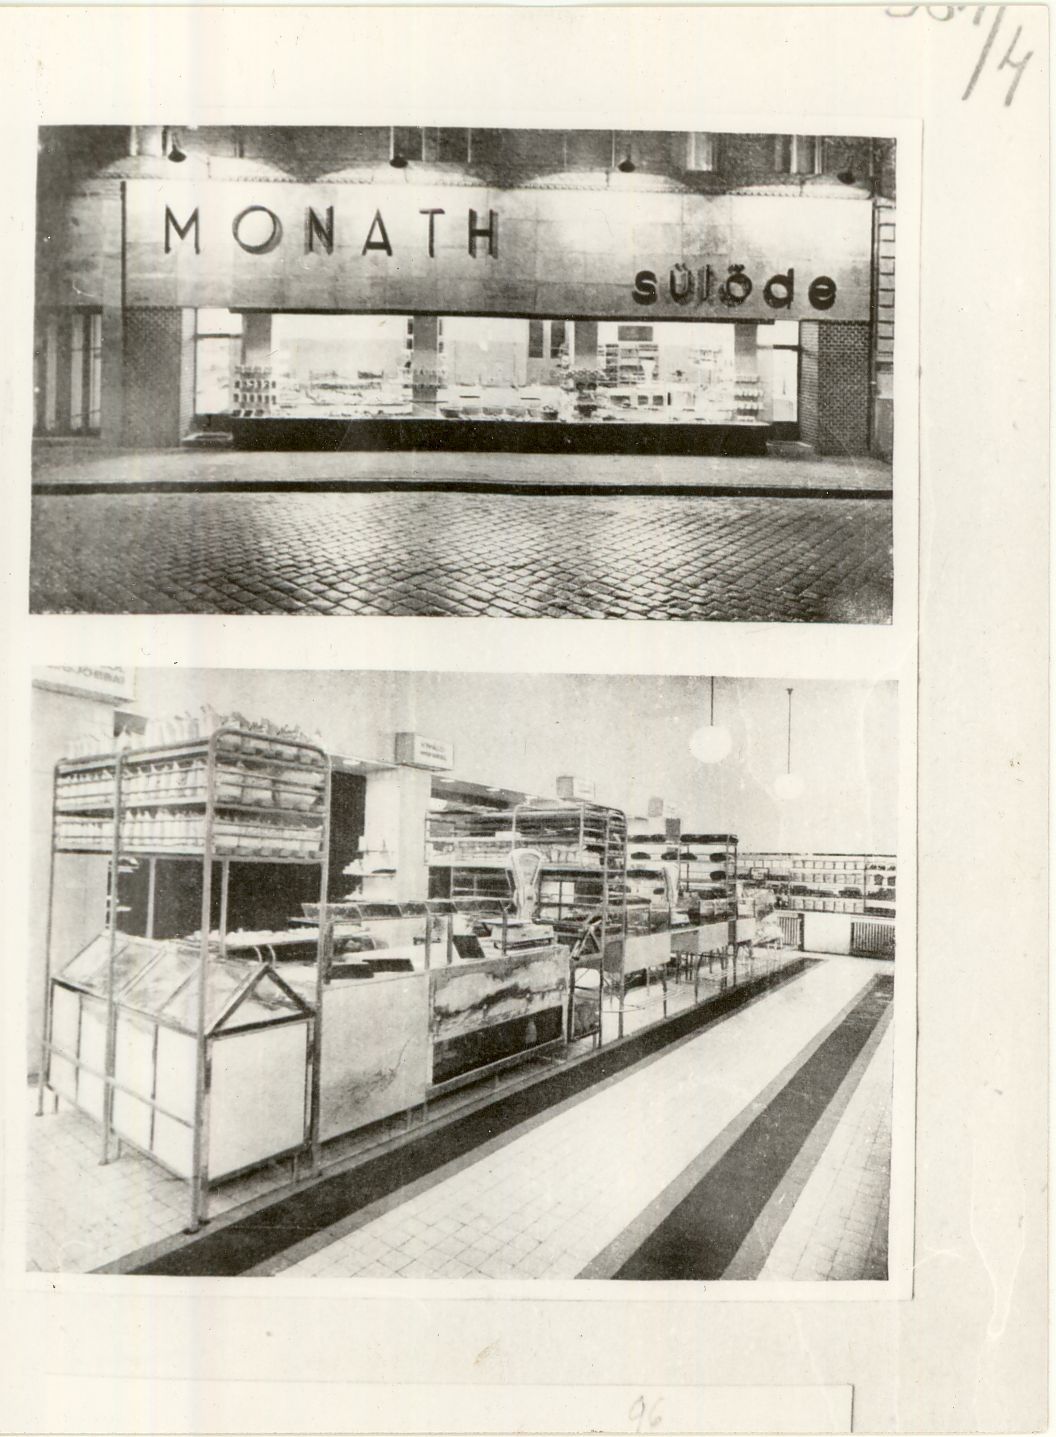 Dávid Monath’s super-modern bakery in the 1930s